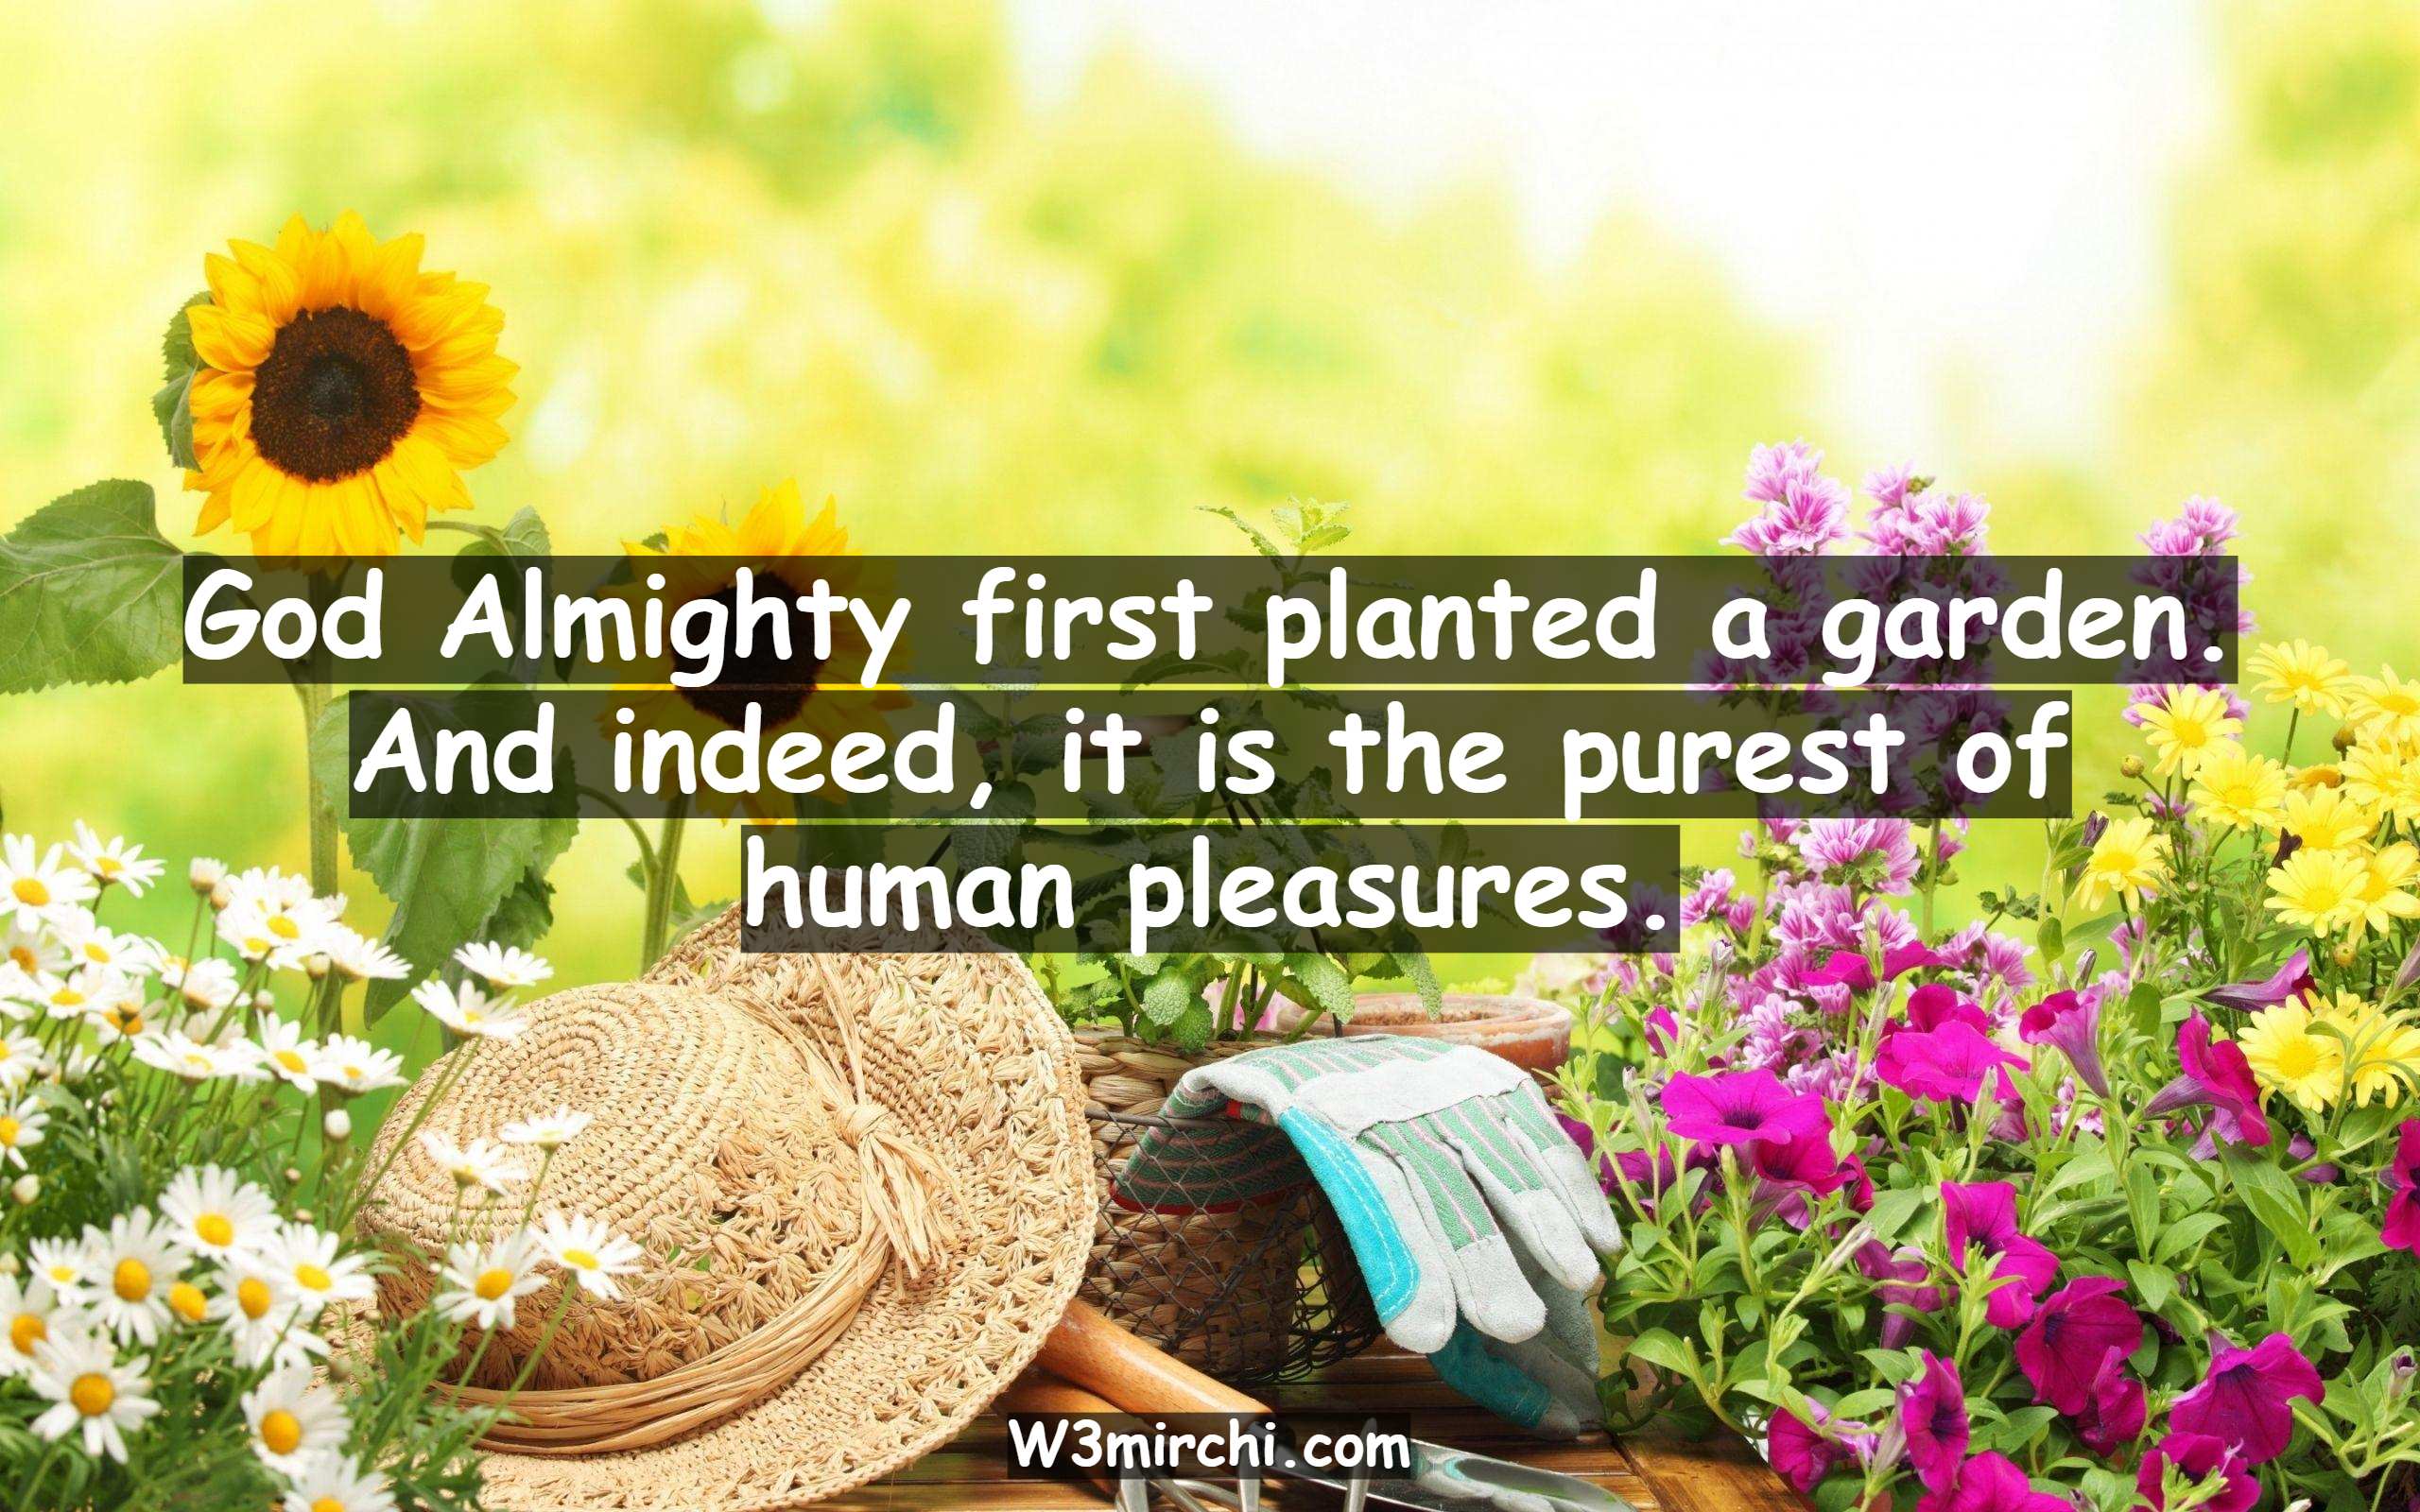 God Almighty first planted a garden.